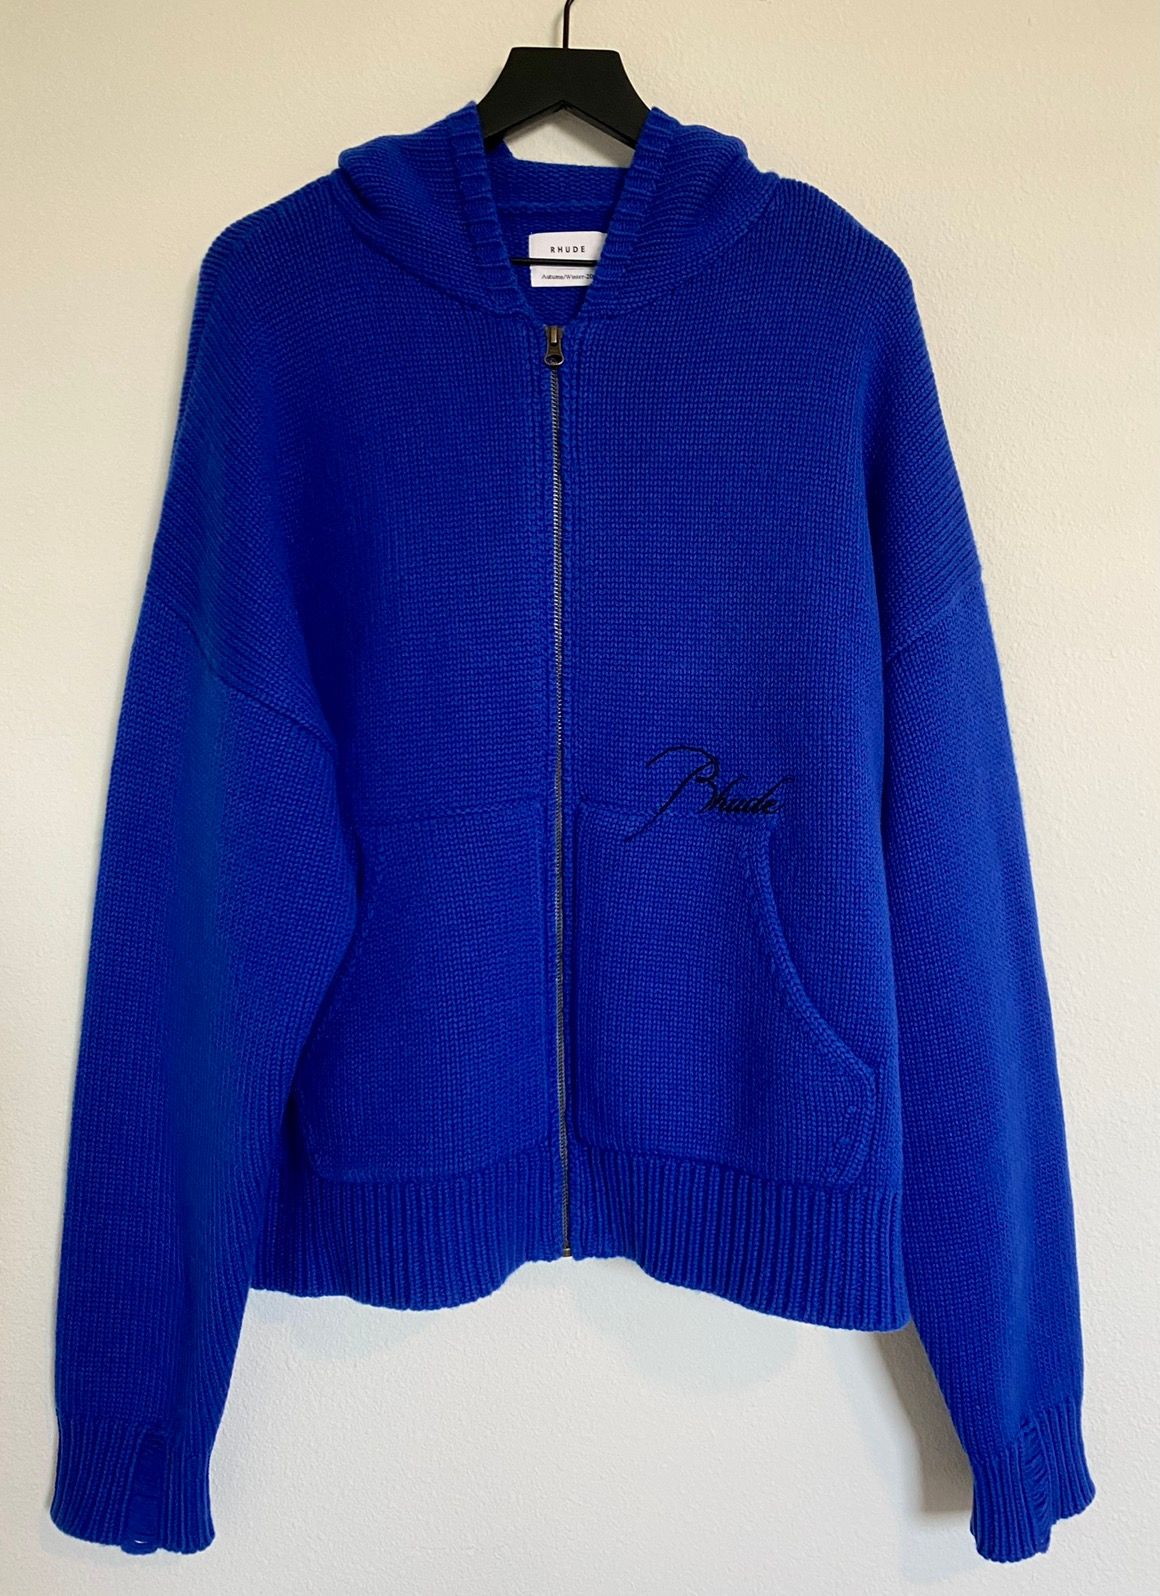 Pre-owned Rhude Hoodie Sweater Woven Blue Wool Cashmere Mens Knit (size Large)